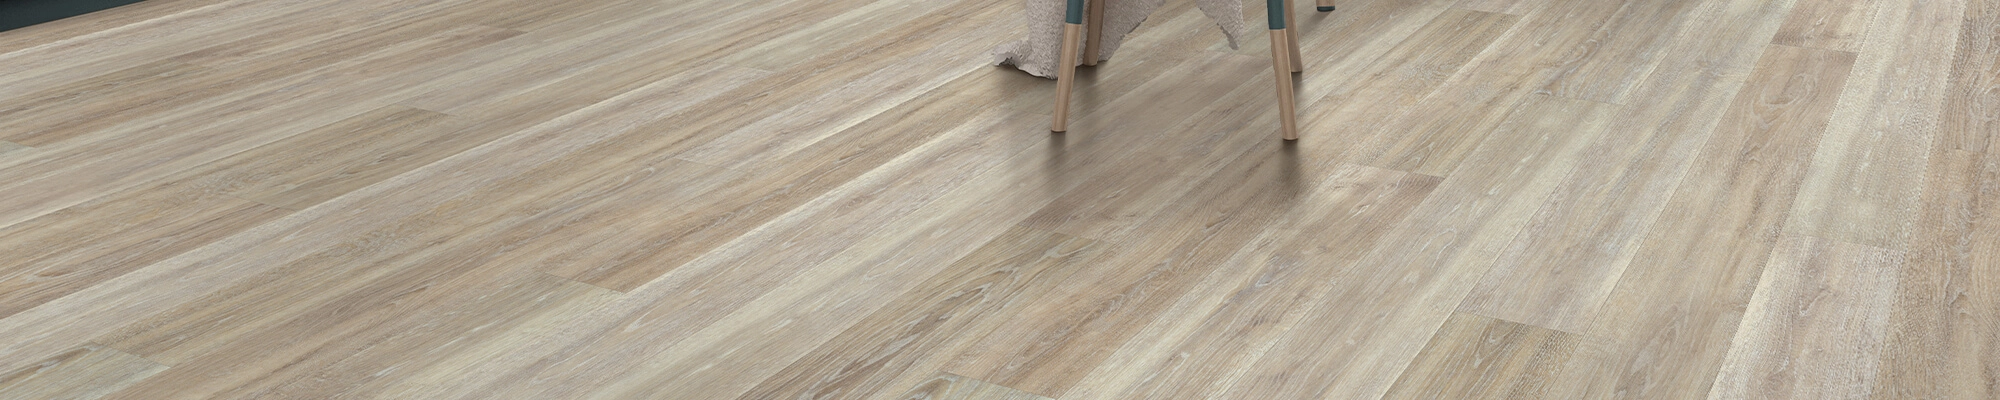 On it Flooring - Local Flooring Retailer in Roswell